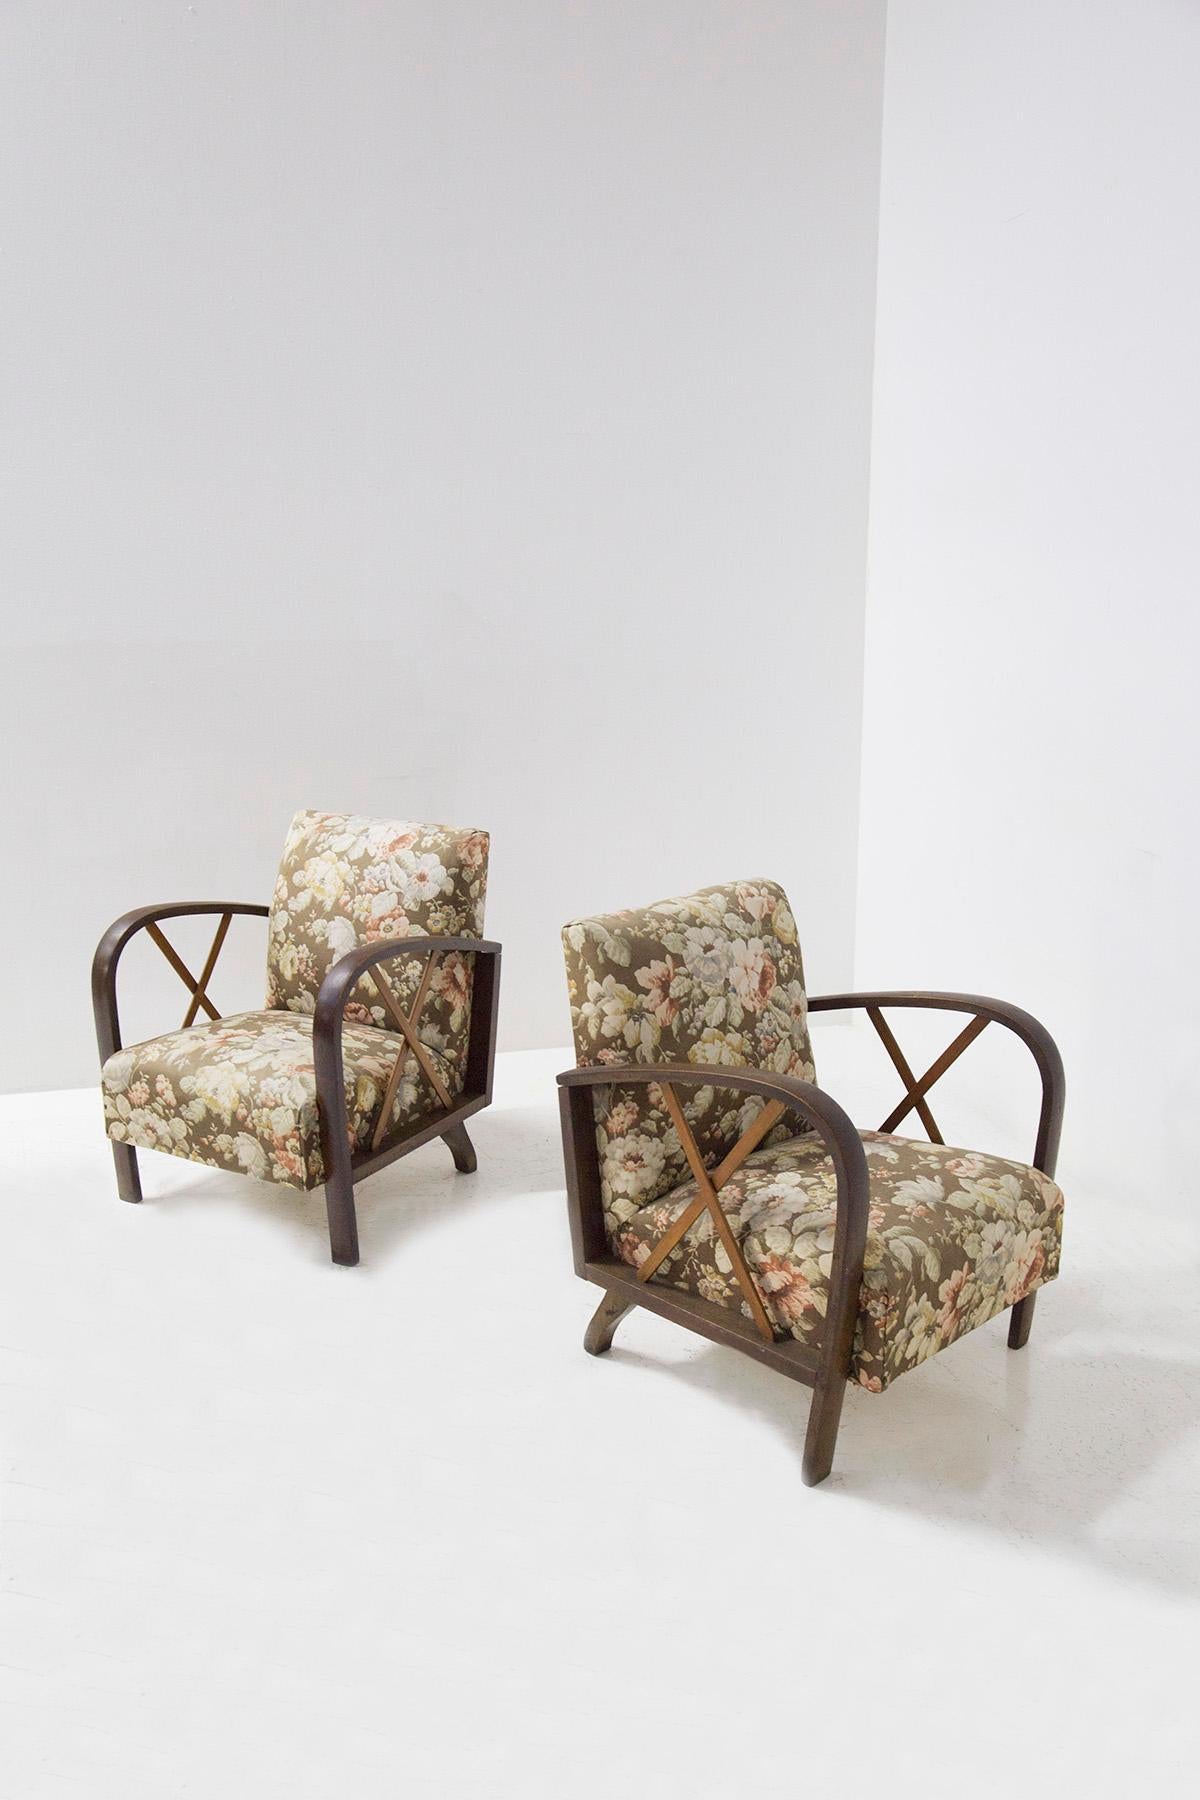 Elegant pair of Italian armchairs attributed to Paolo Buffa from the 1950s. The armchairs are in its original state of the time, also the fabric is original of the time with floral weave. The frame is made of wood and its peculiarity is in its